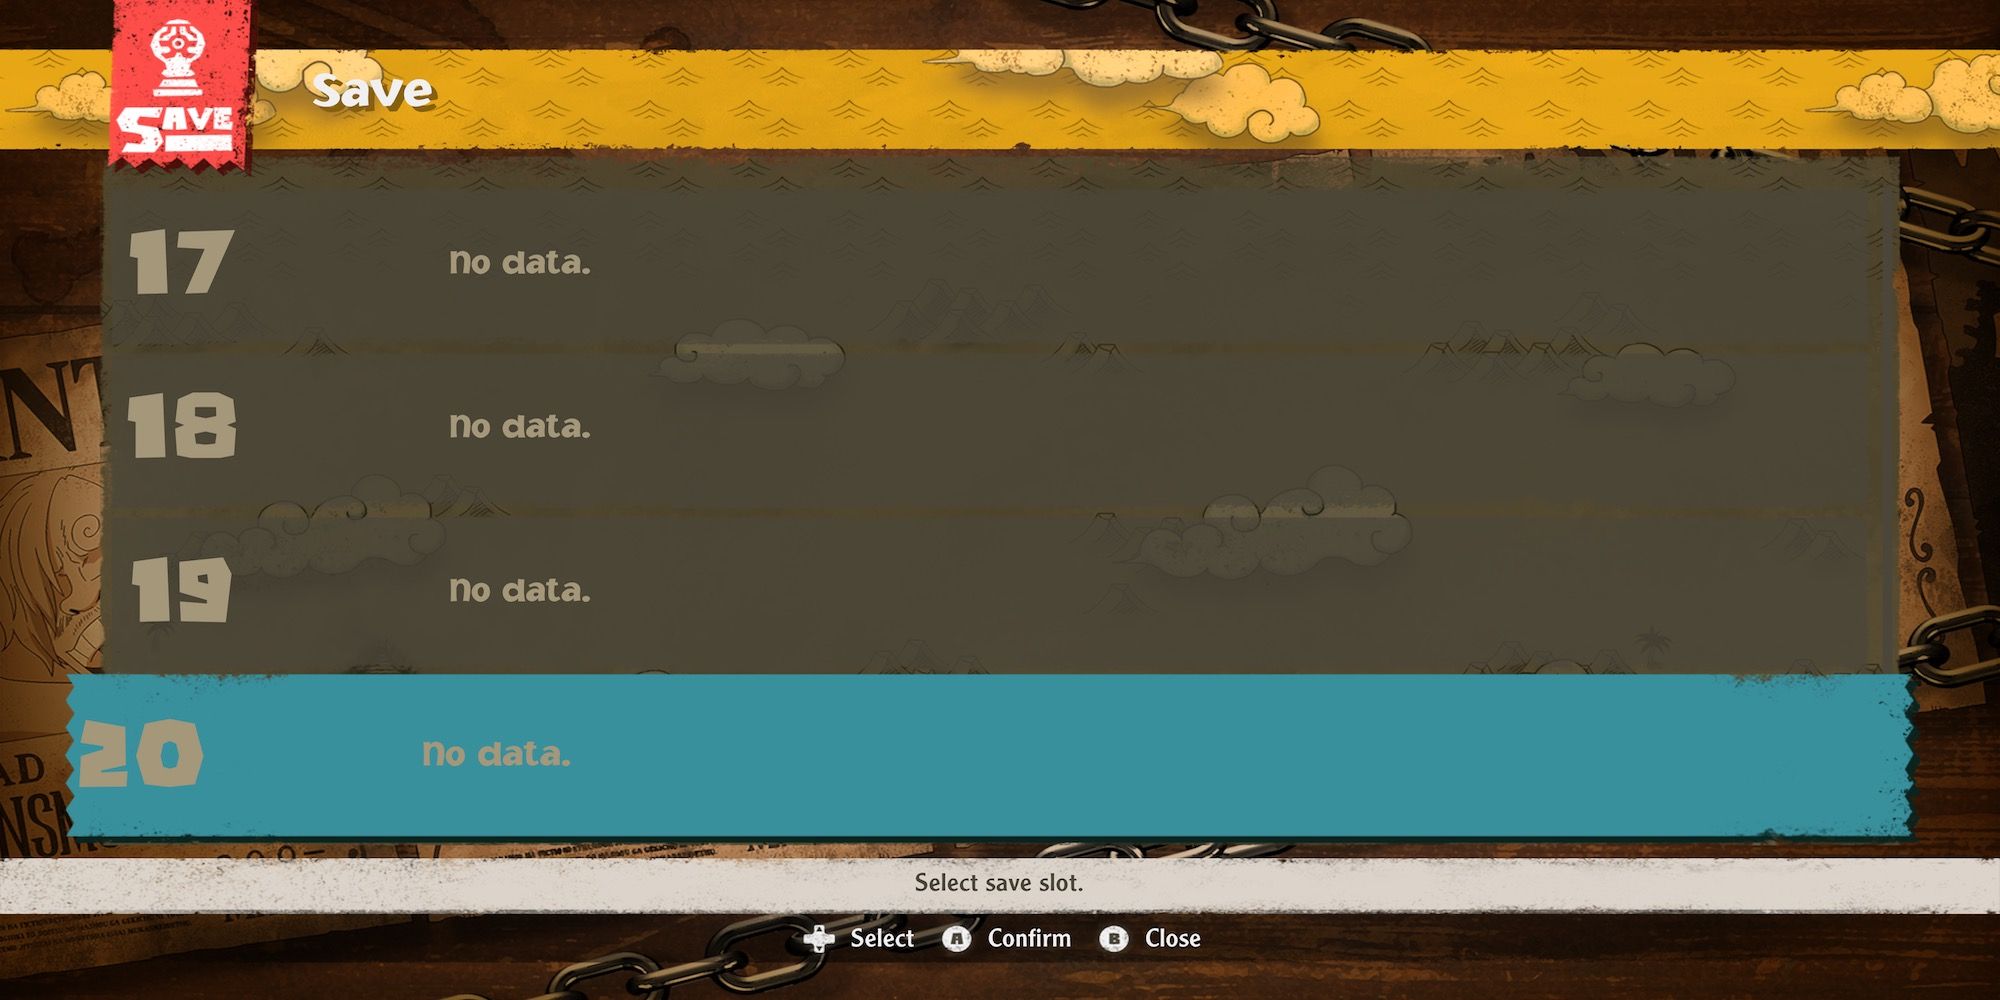 The save menu in One Piece Odyssey